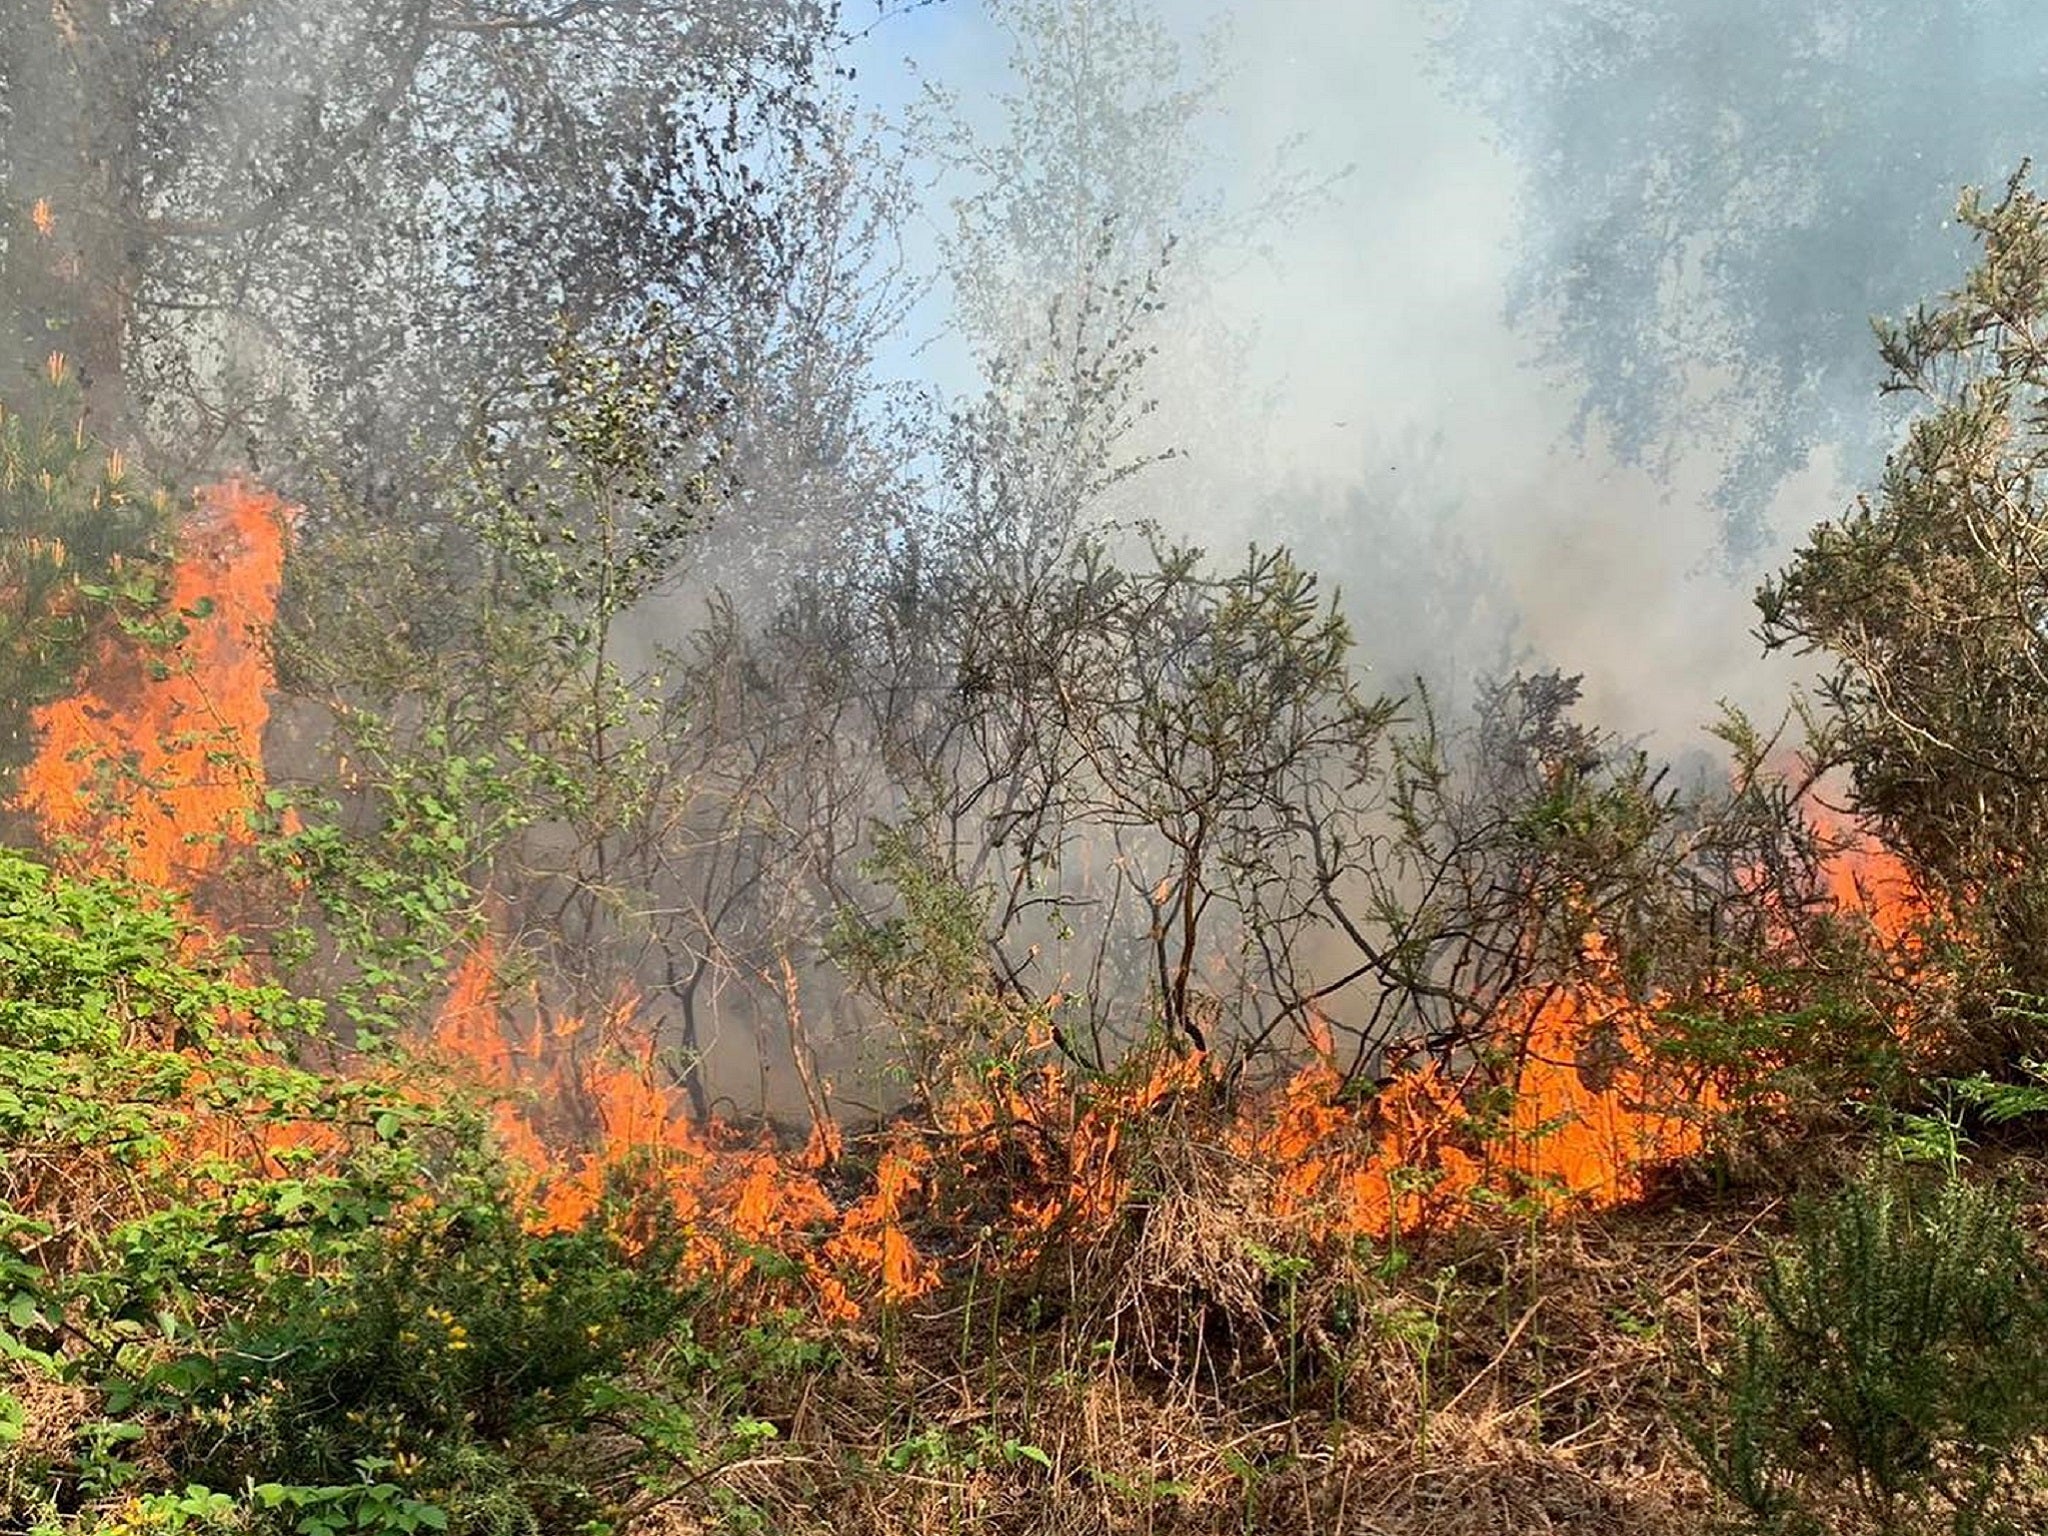 A disposable barbecue is thought to have caused a fire at Puddletown Forest, in Dorset, that took about 60 firefighters almost five hours to put out, 26 April 2020.